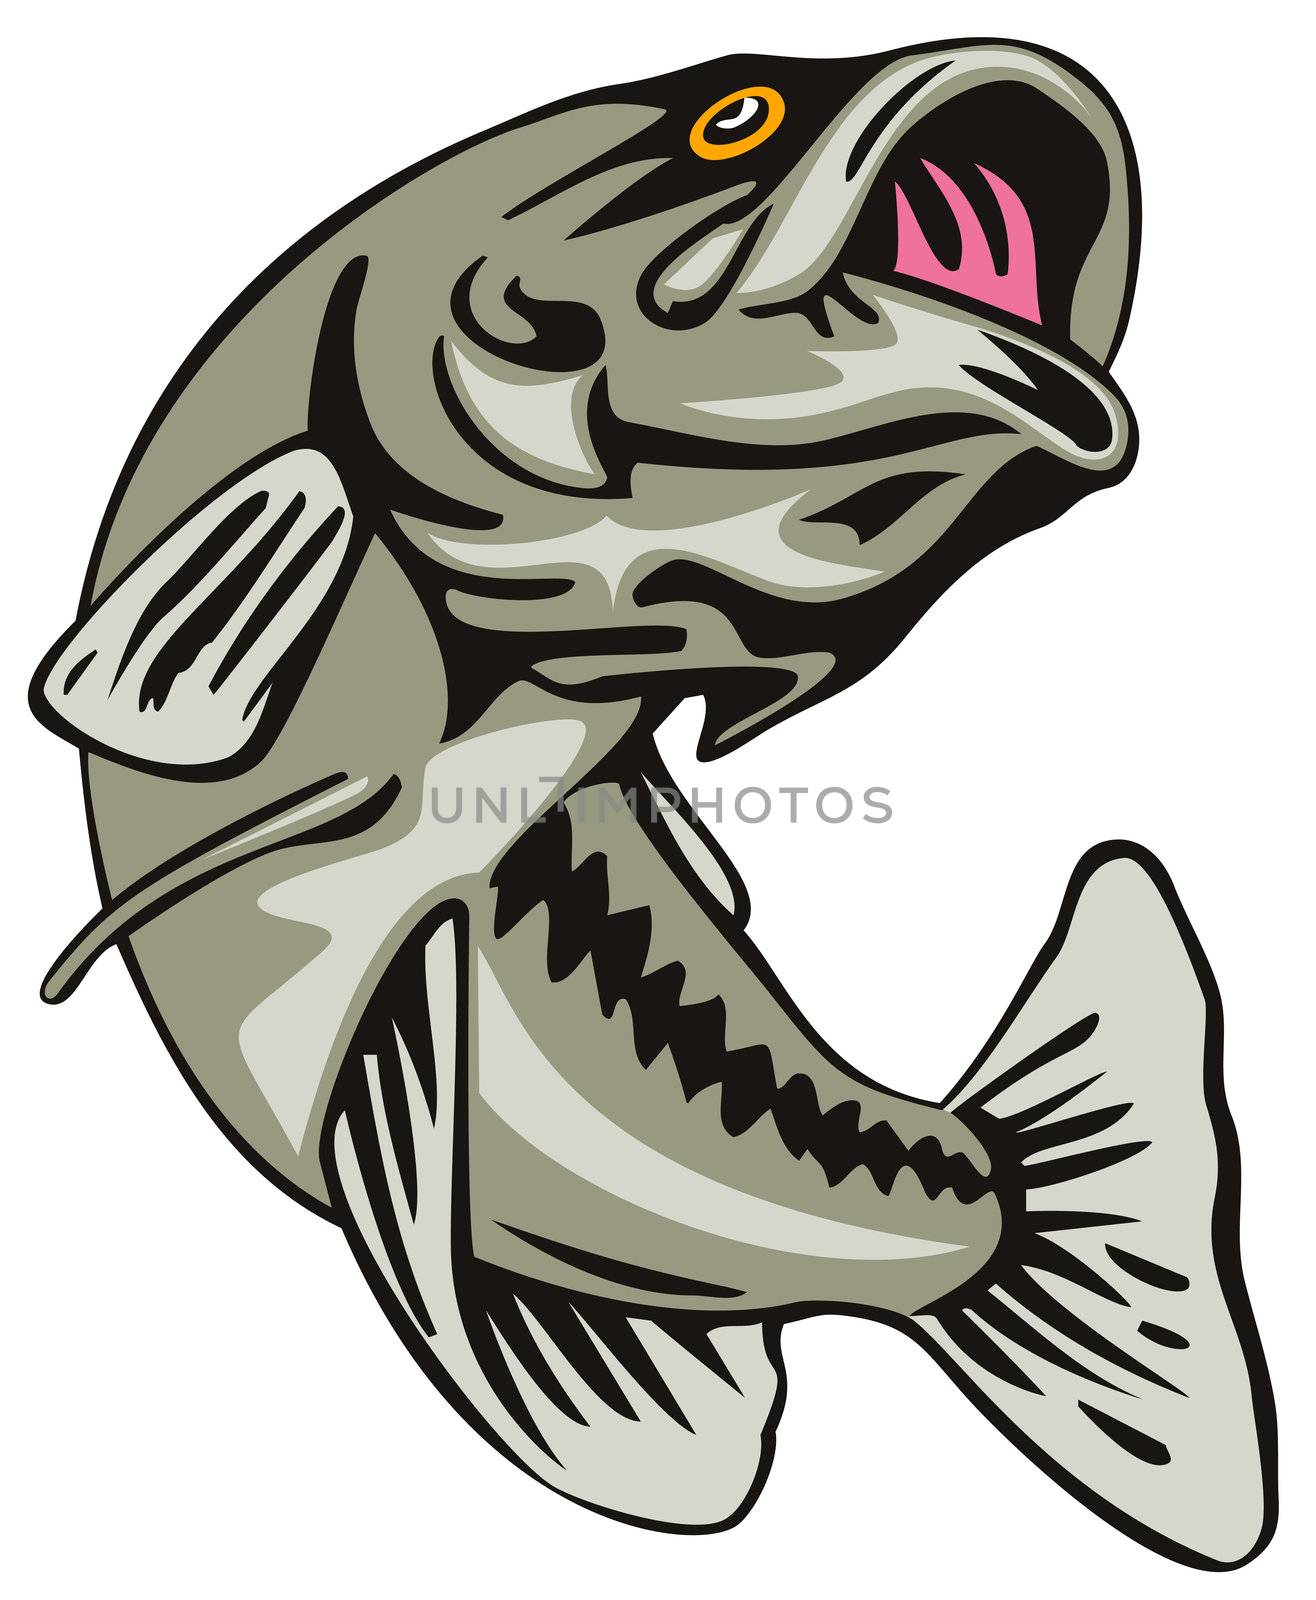 illustration of a largemouth bass jumping done in retro style